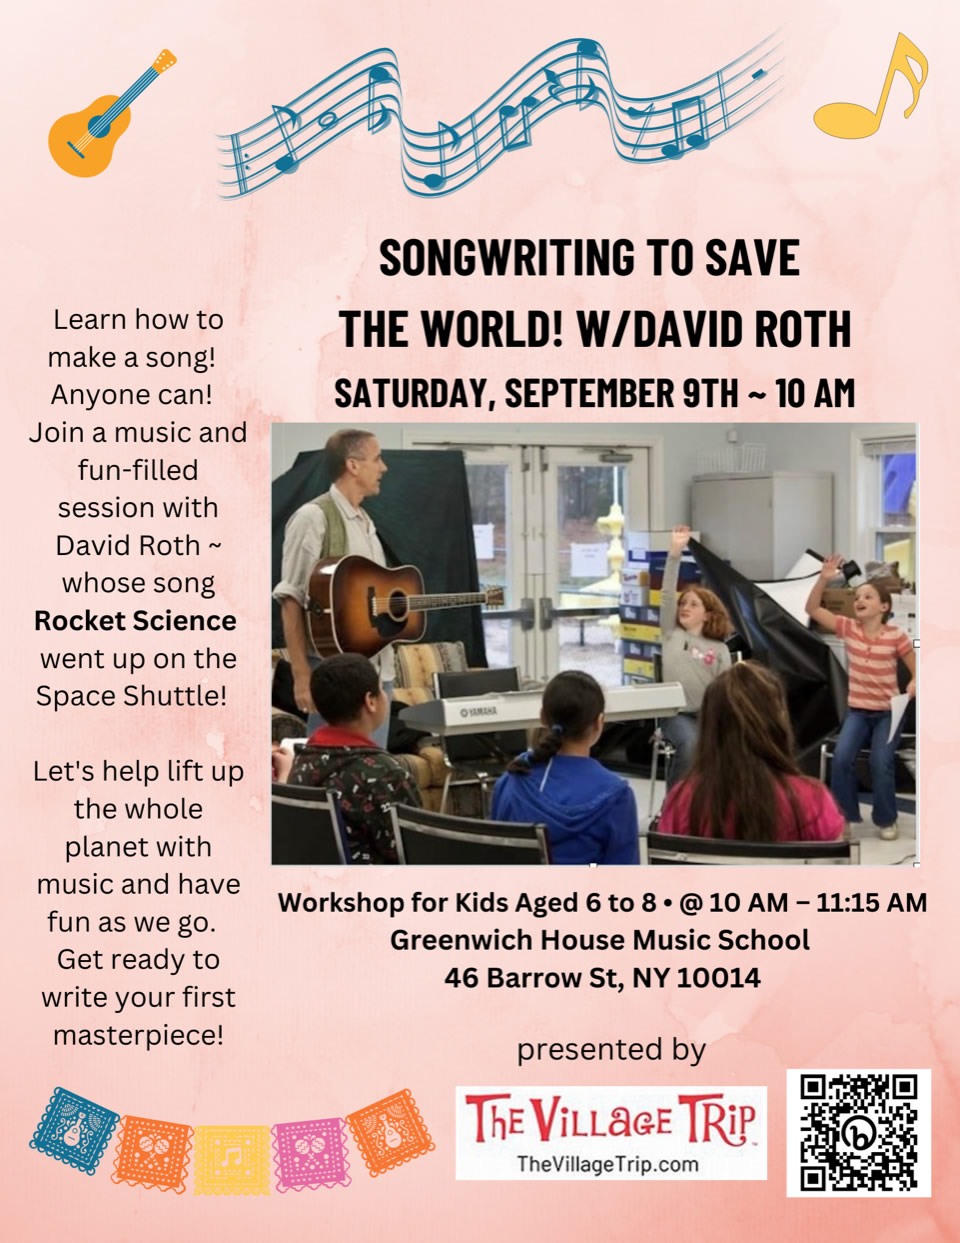 David Roth Songwriting Workshop 6 to 8 years